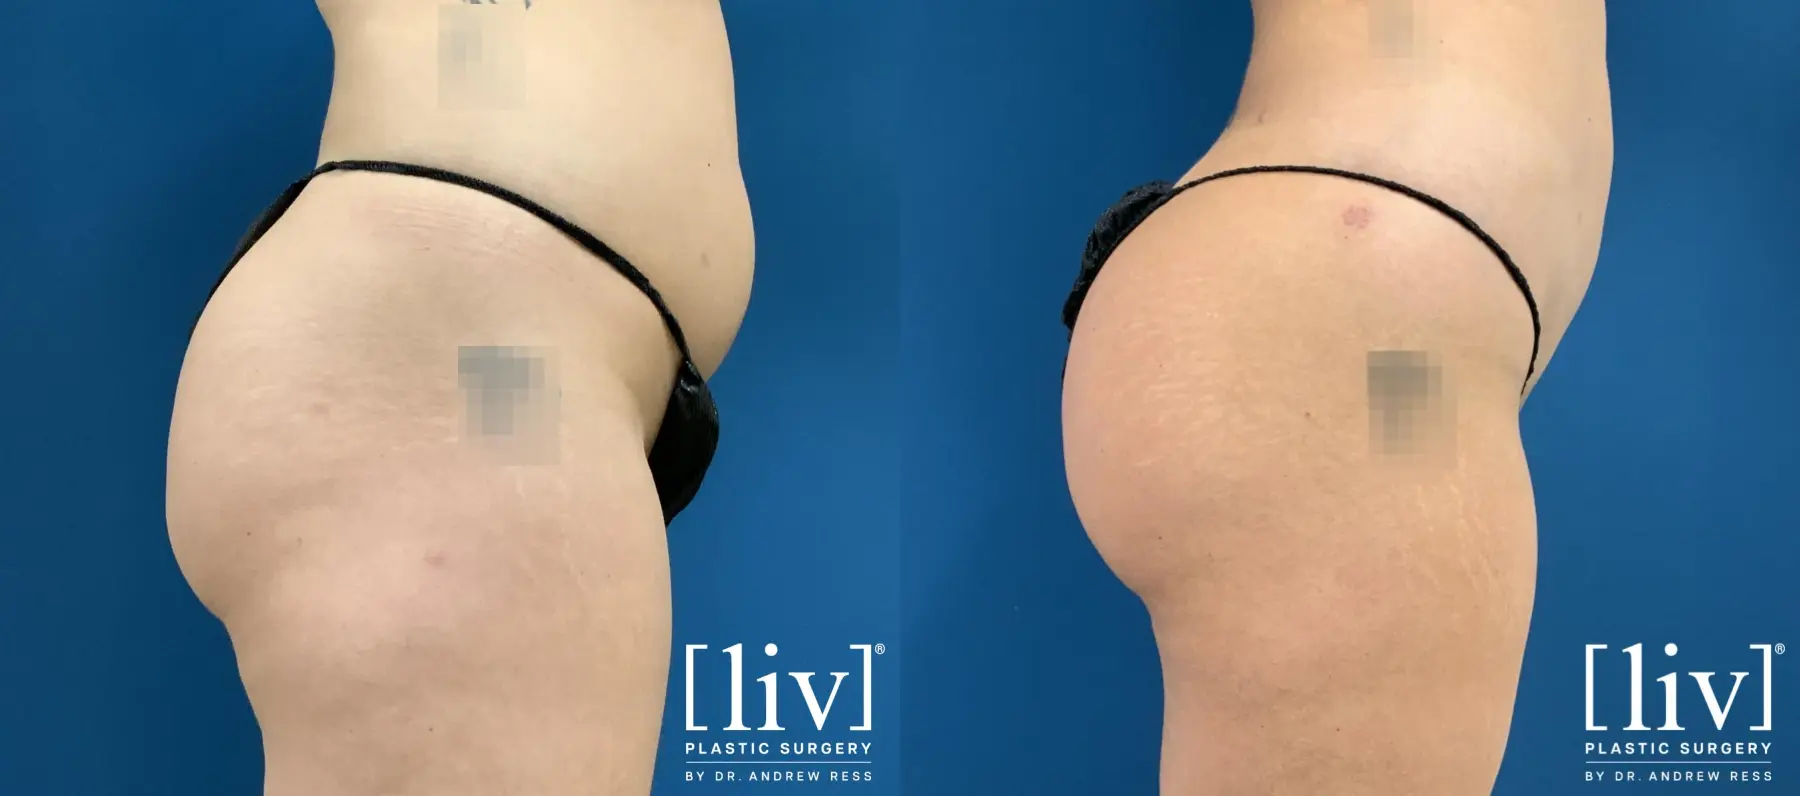 Brazilian Butt Lift: Patient 1 - Before and After 2